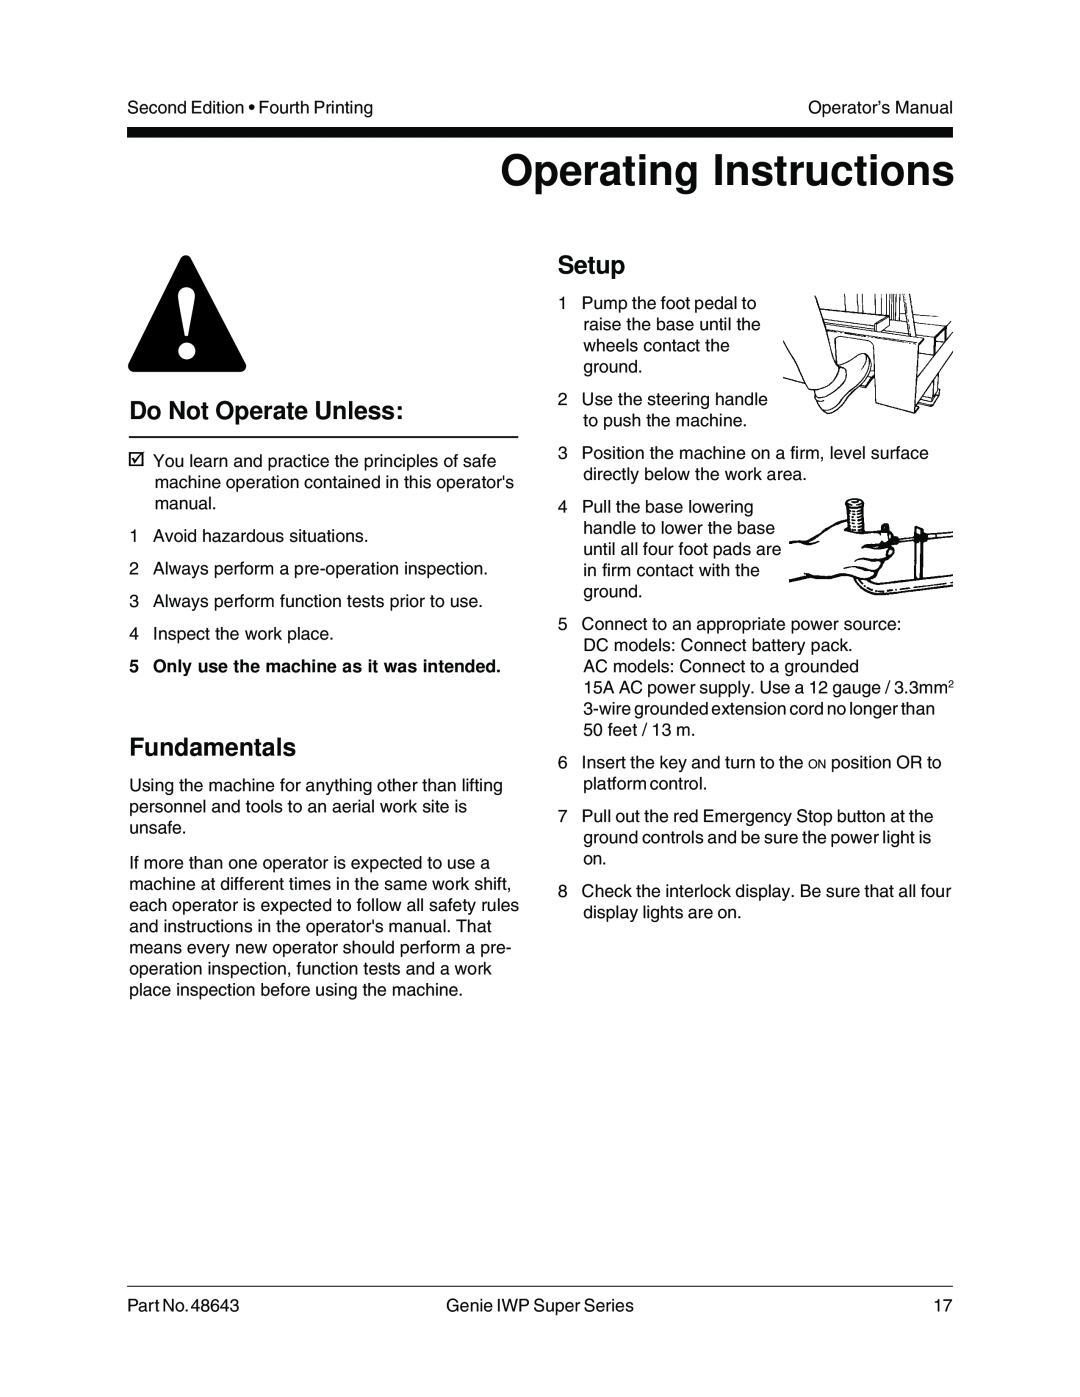 Genie 48643 Operating Instructions, Setup, 5Only use the machine as it was intended, Do Not Operate Unless, Fundamentals 